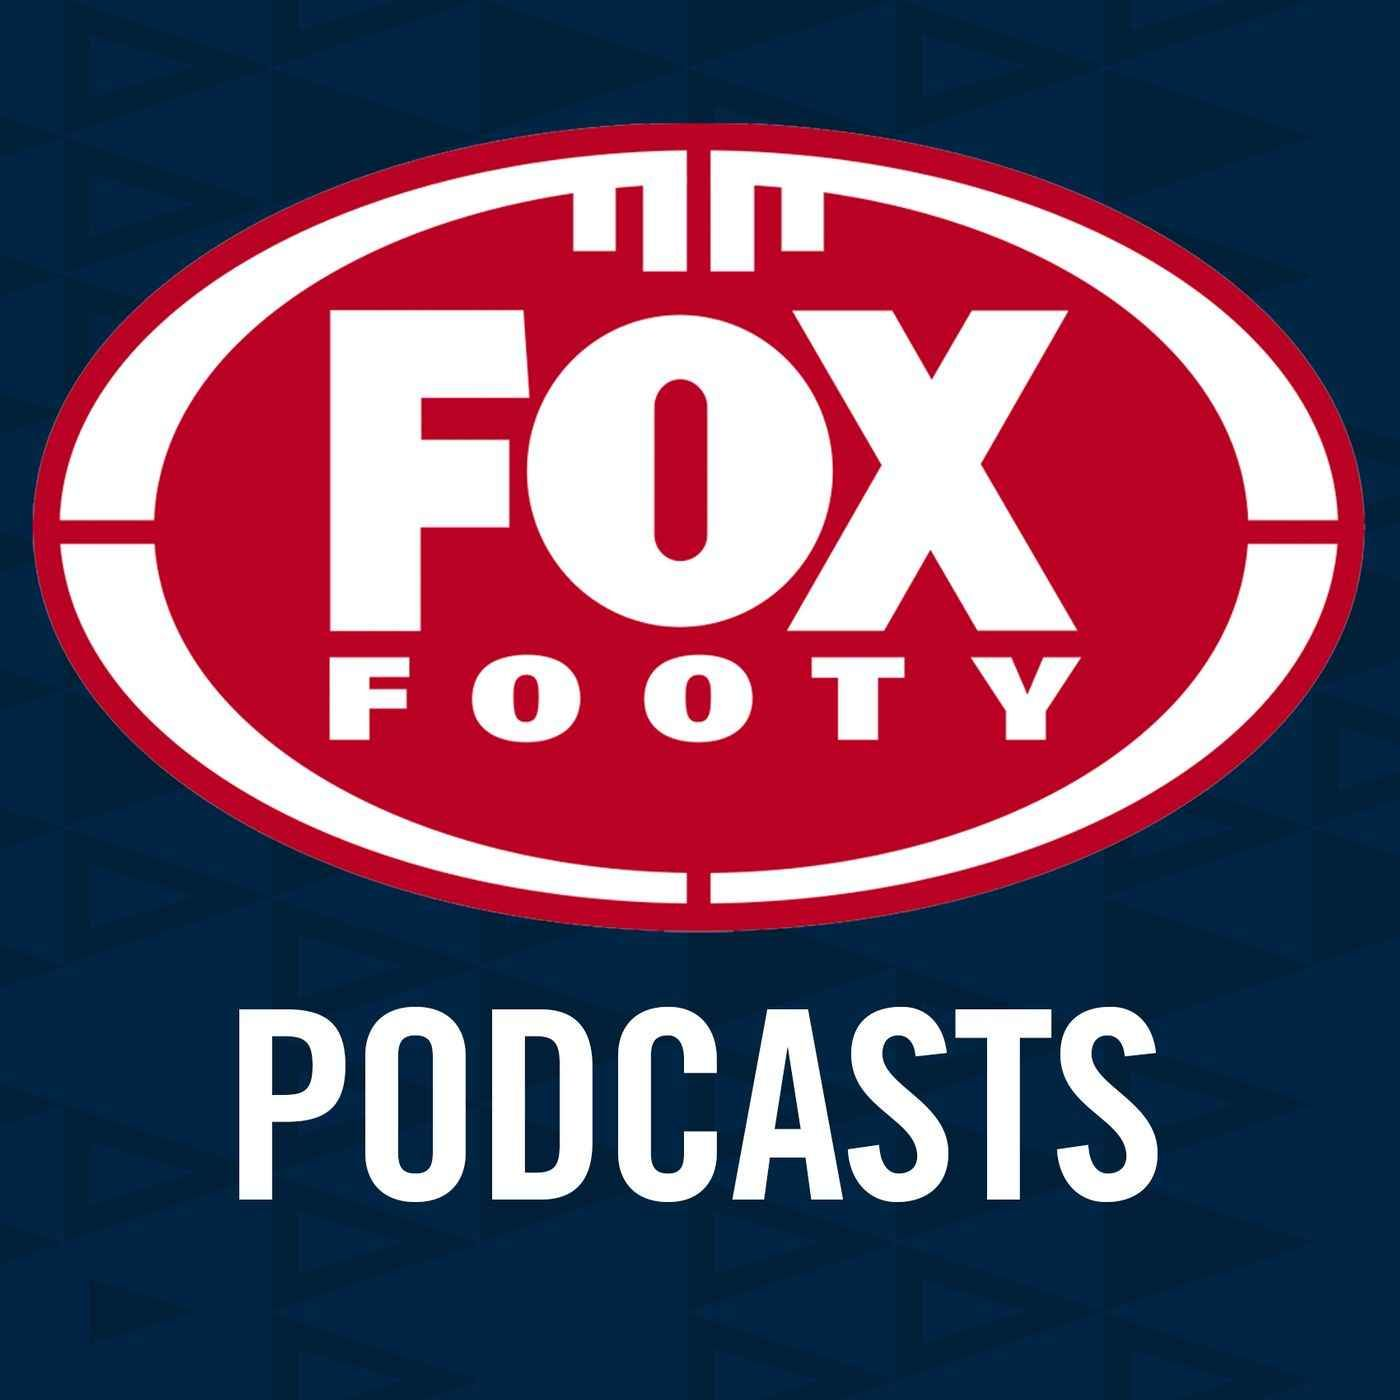 Fox Footy Podcast: The best week 1 ever? Plus semi-finals previewed